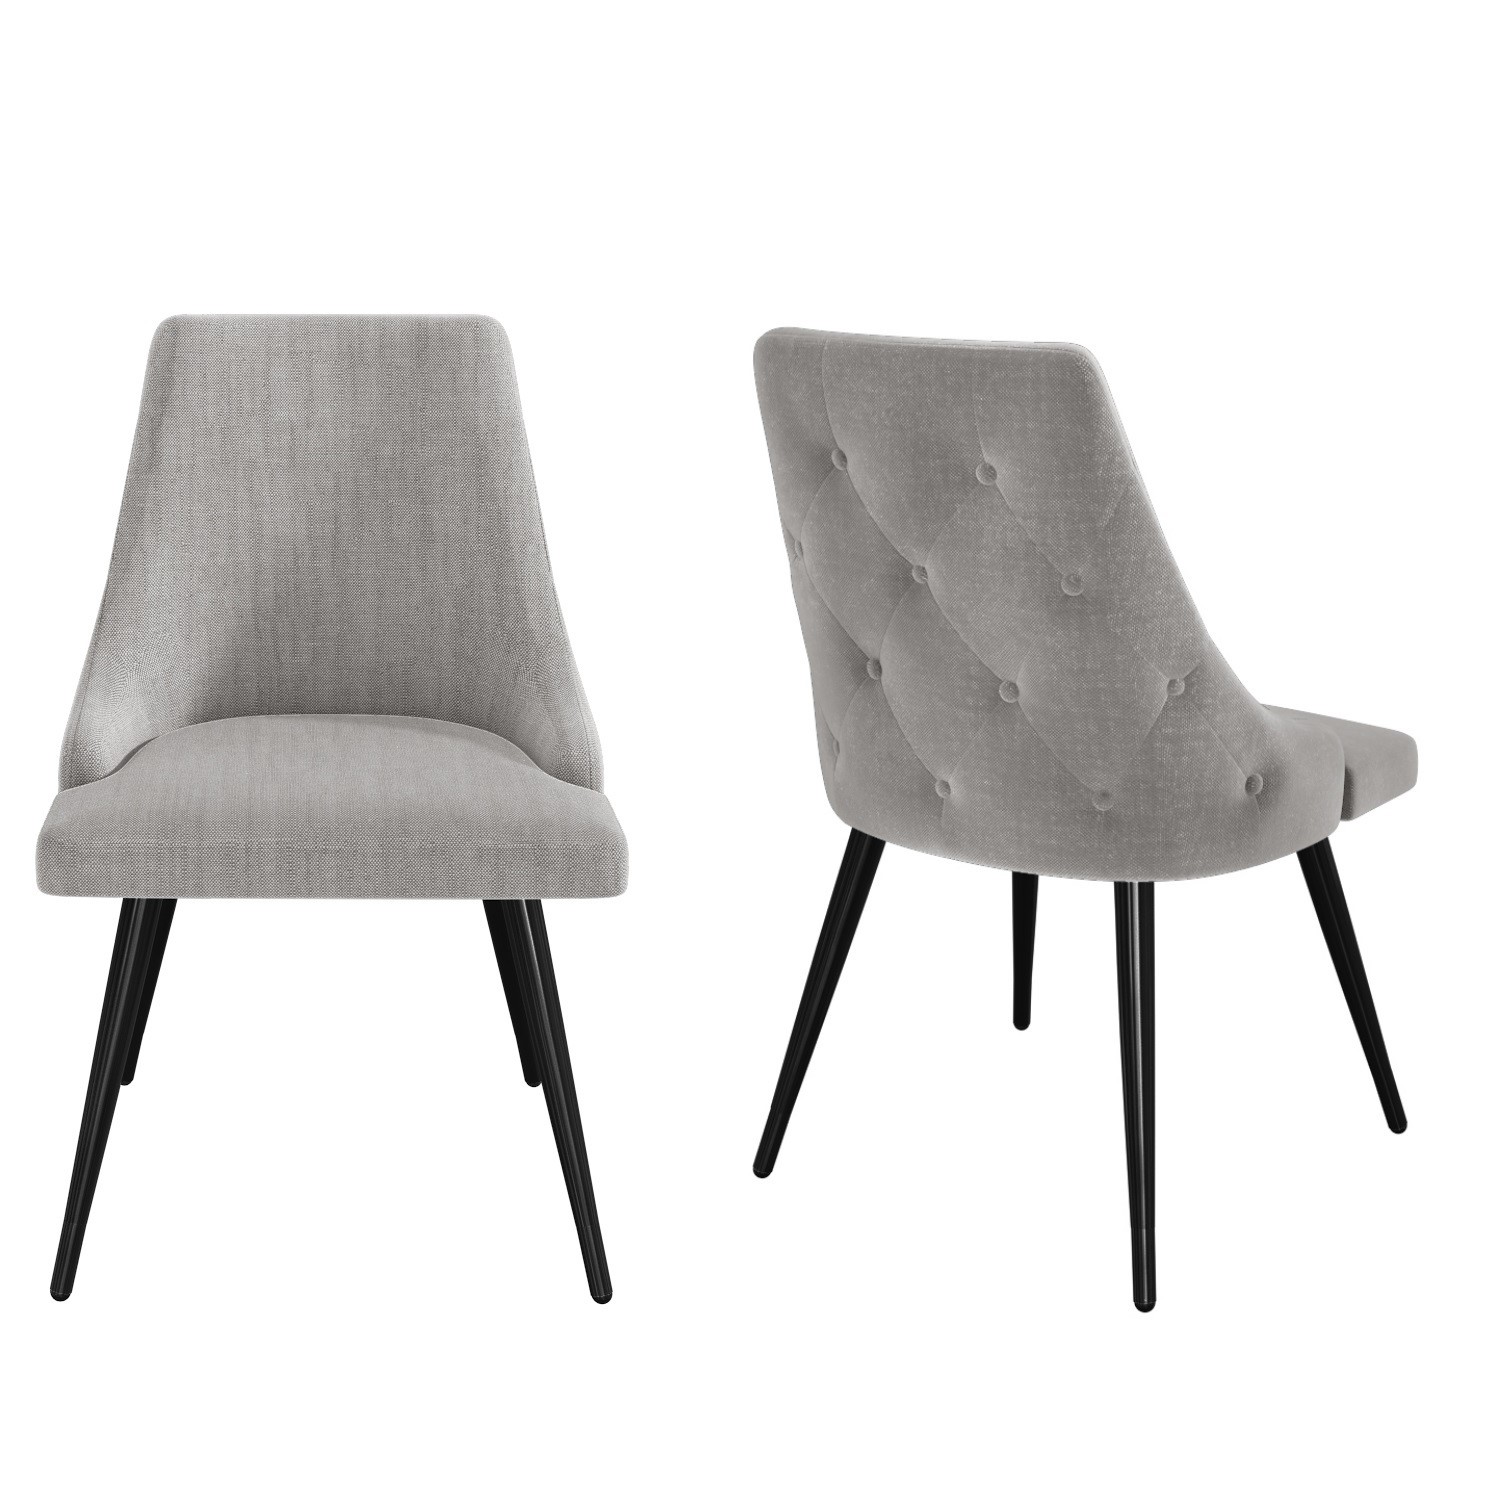 Pair Of Light Grey Fabric Dining Chairs, Grey Fabric Chair With Black Legs